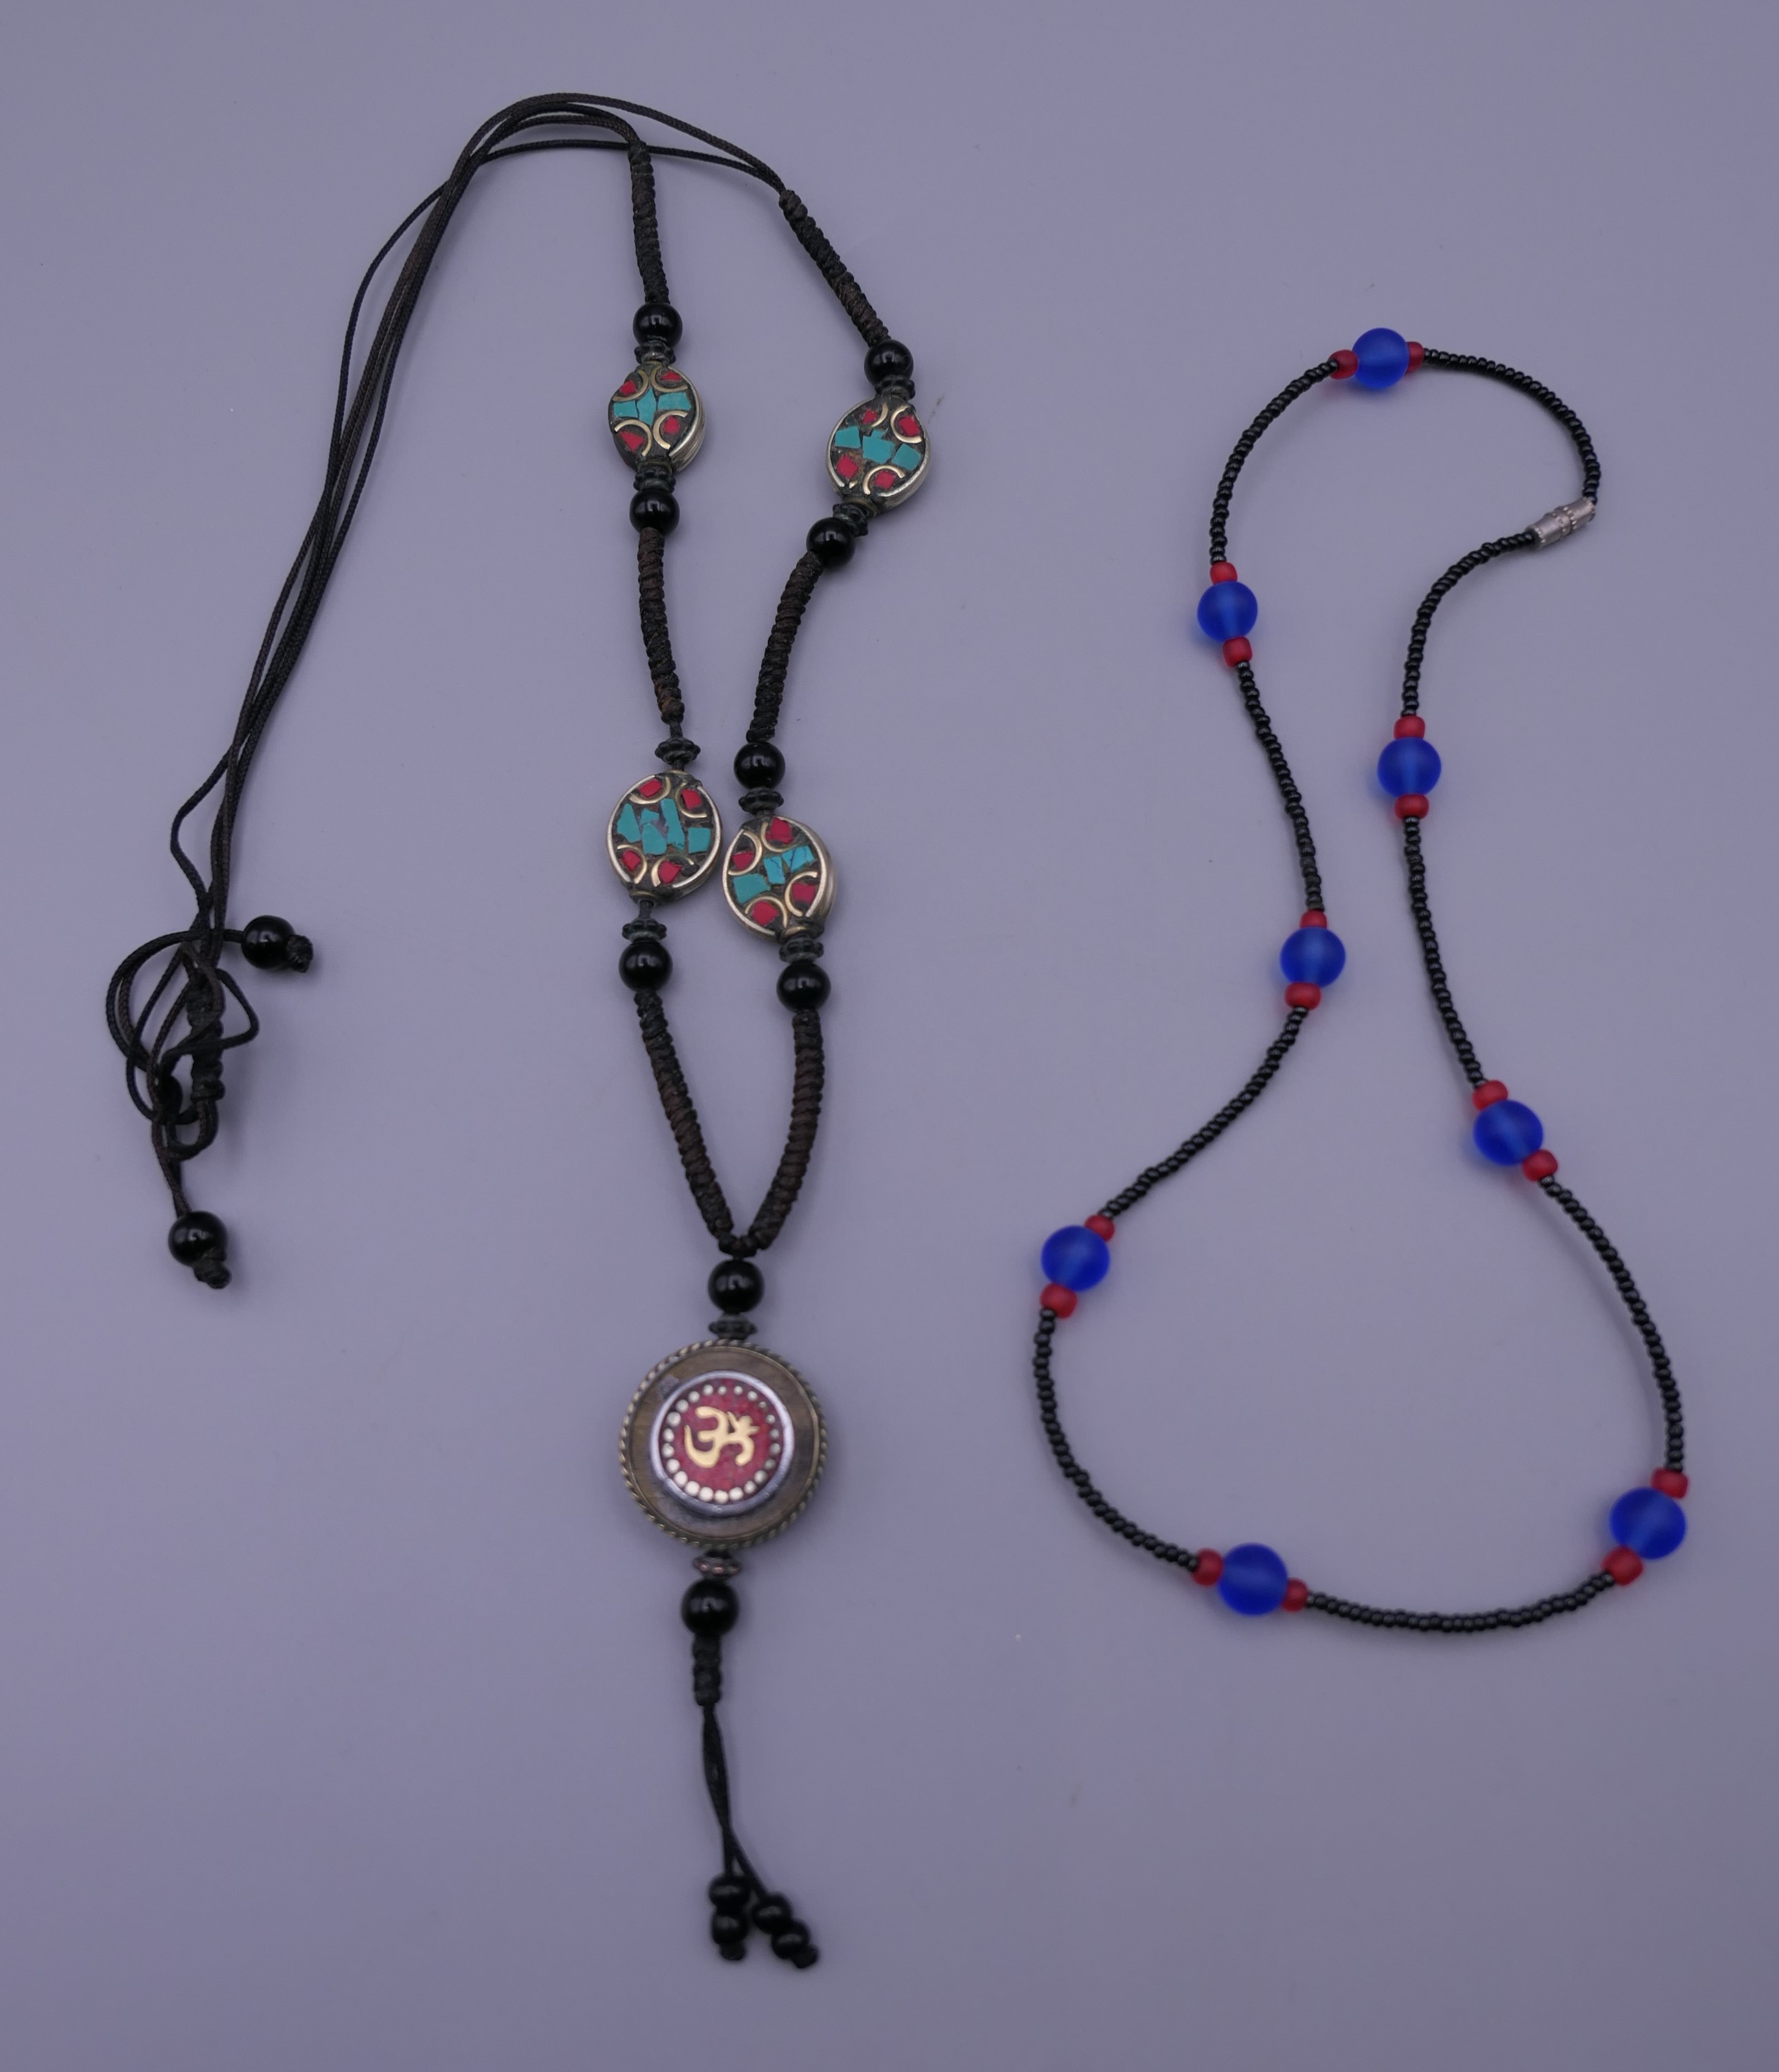 A Tibetan necklace and an African glass bead necklace.